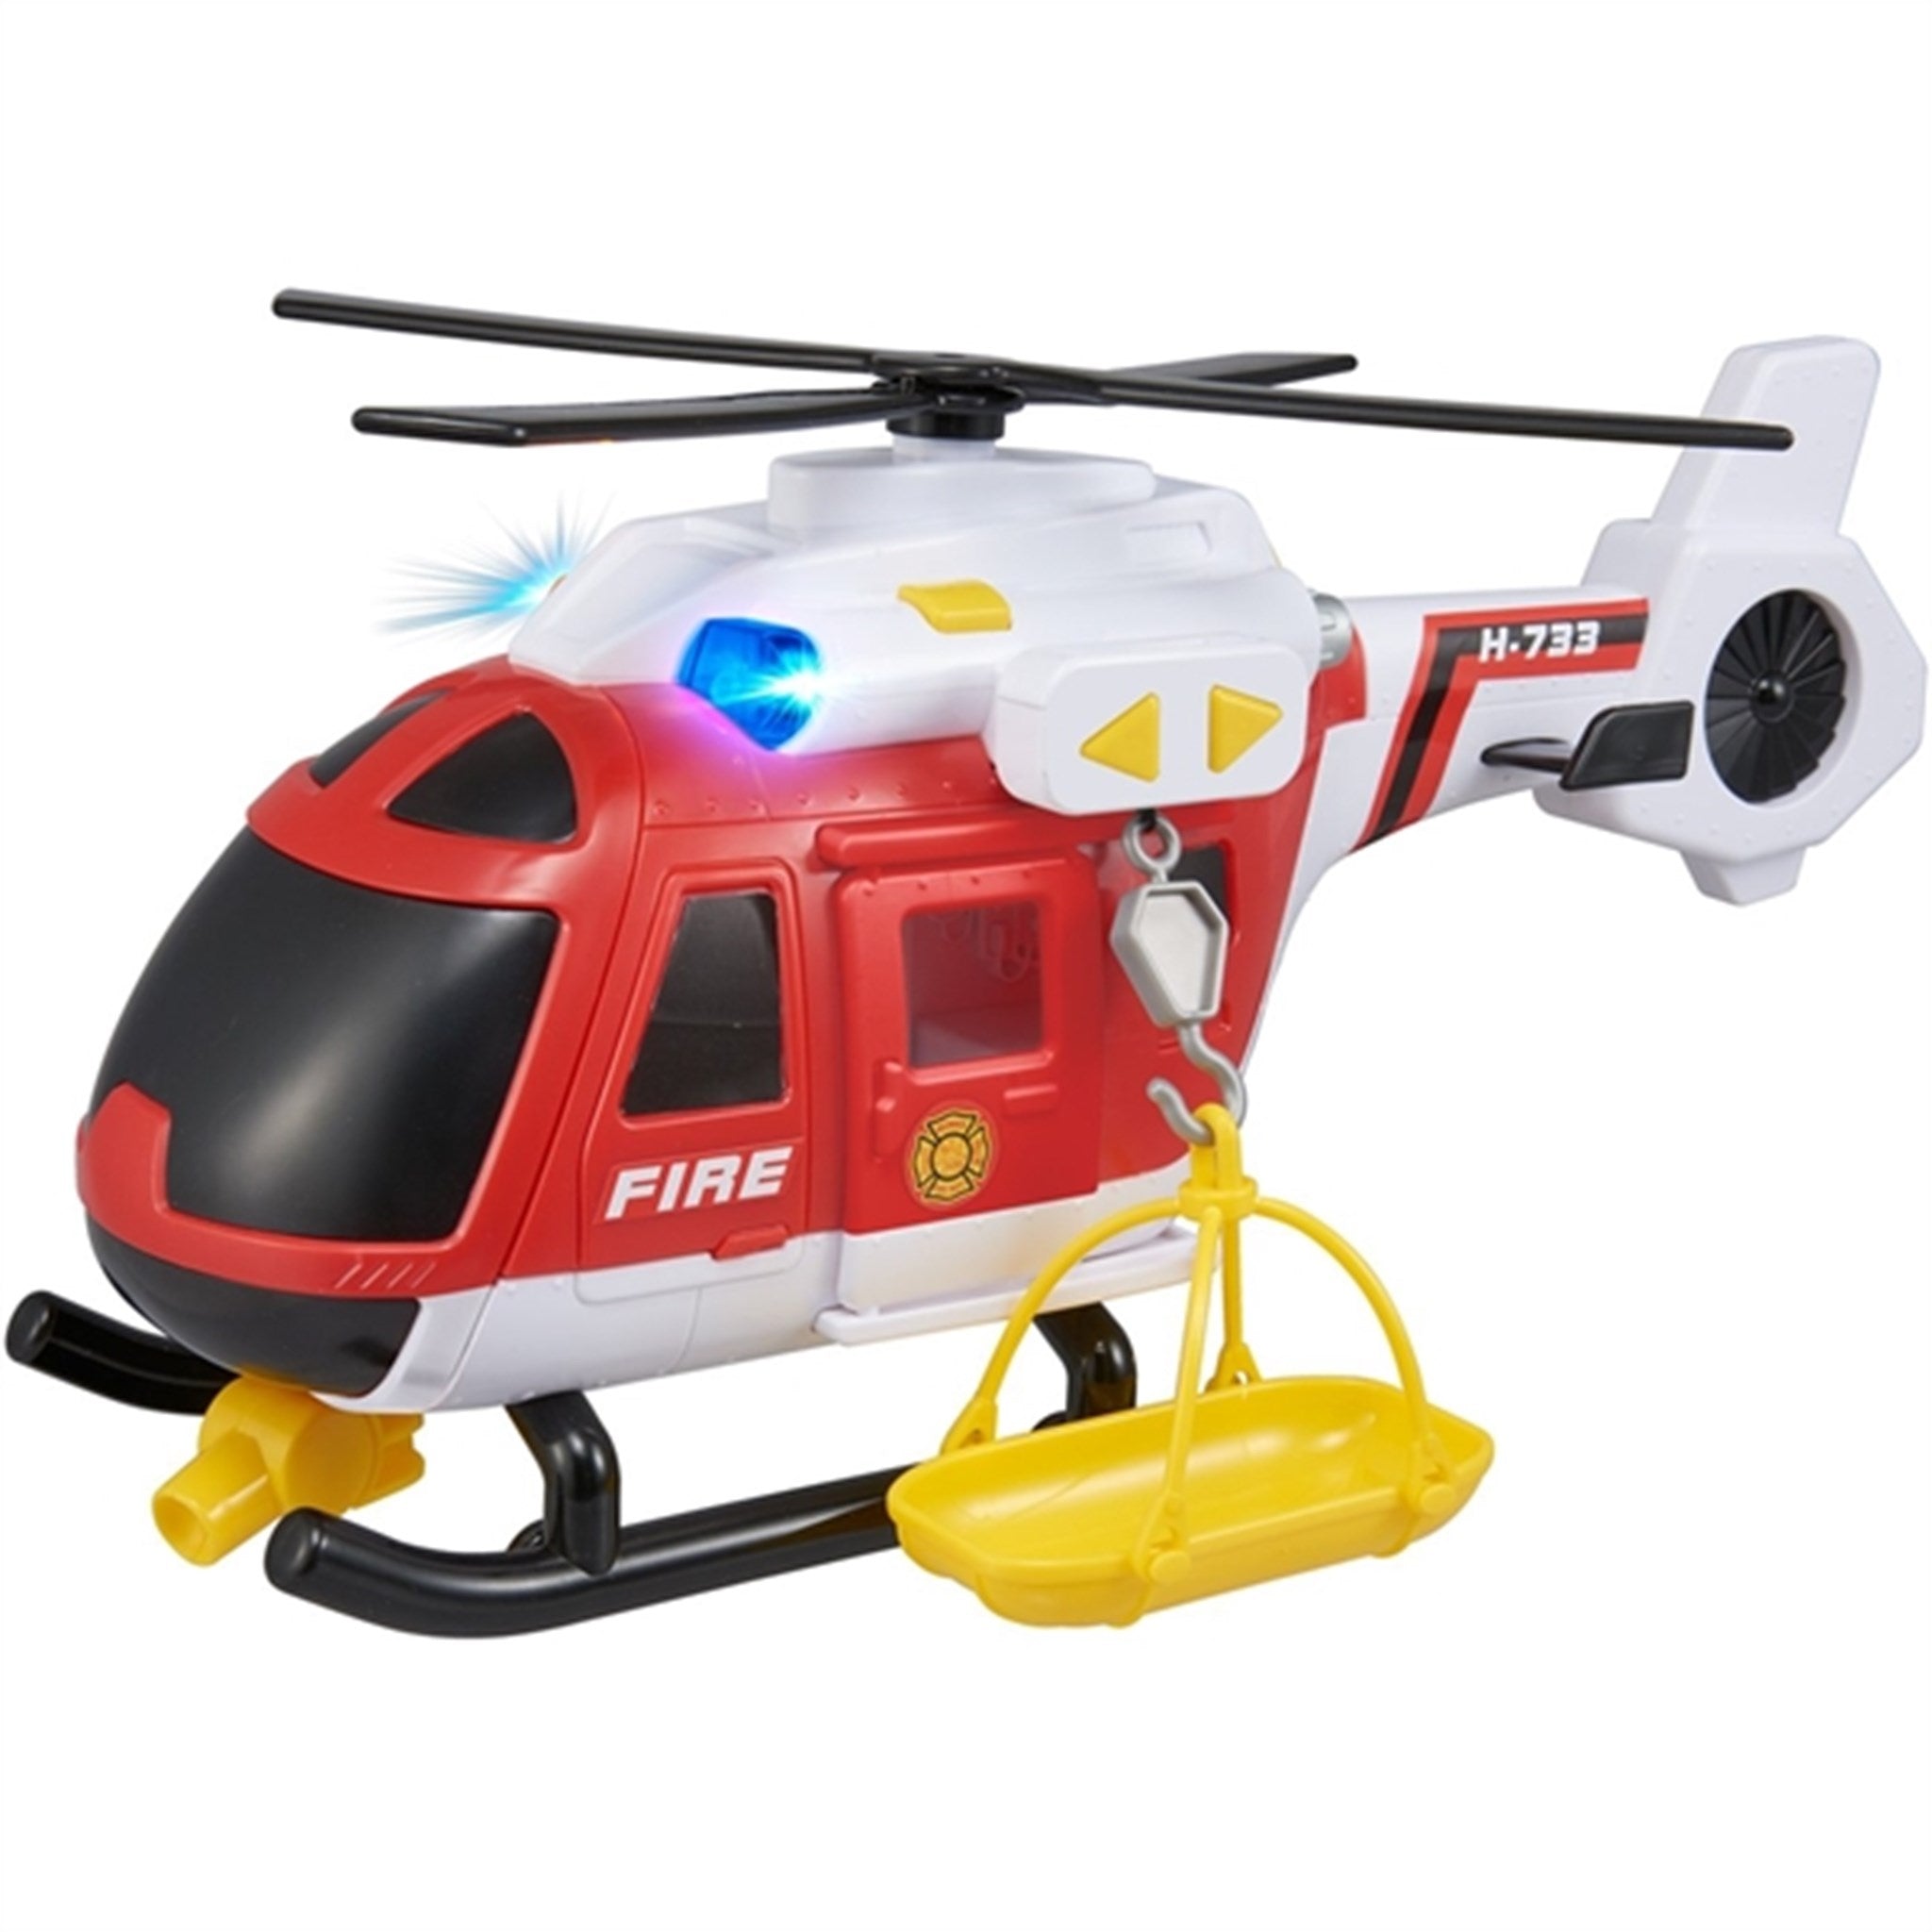 Teamsterz Large L&S Fire Helicopter